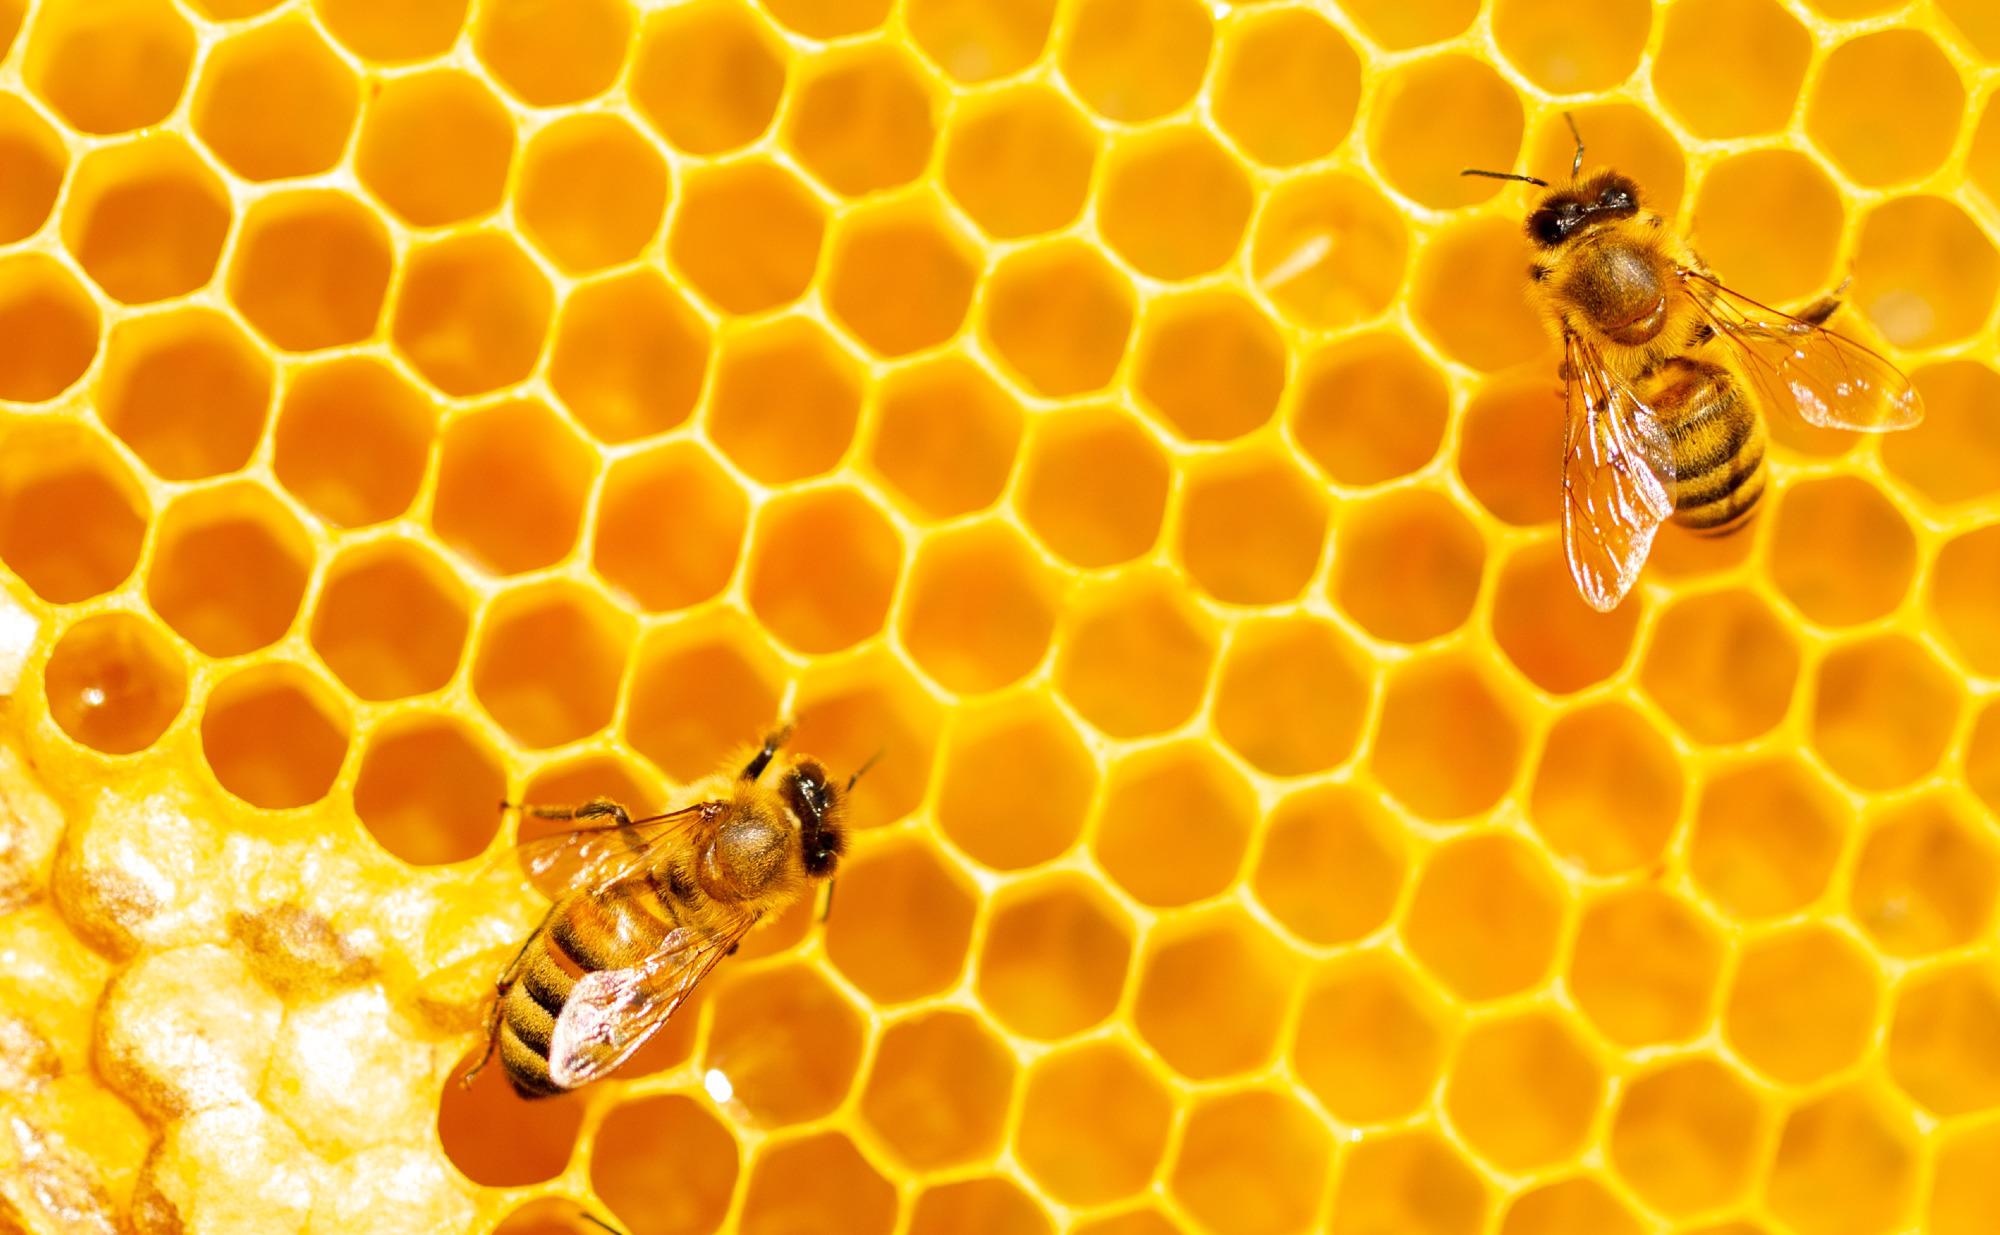 Study: Bees can be trained to identify SARS-CoV-2 infected samples. Image Credit: Vera Larina / Shutterstock